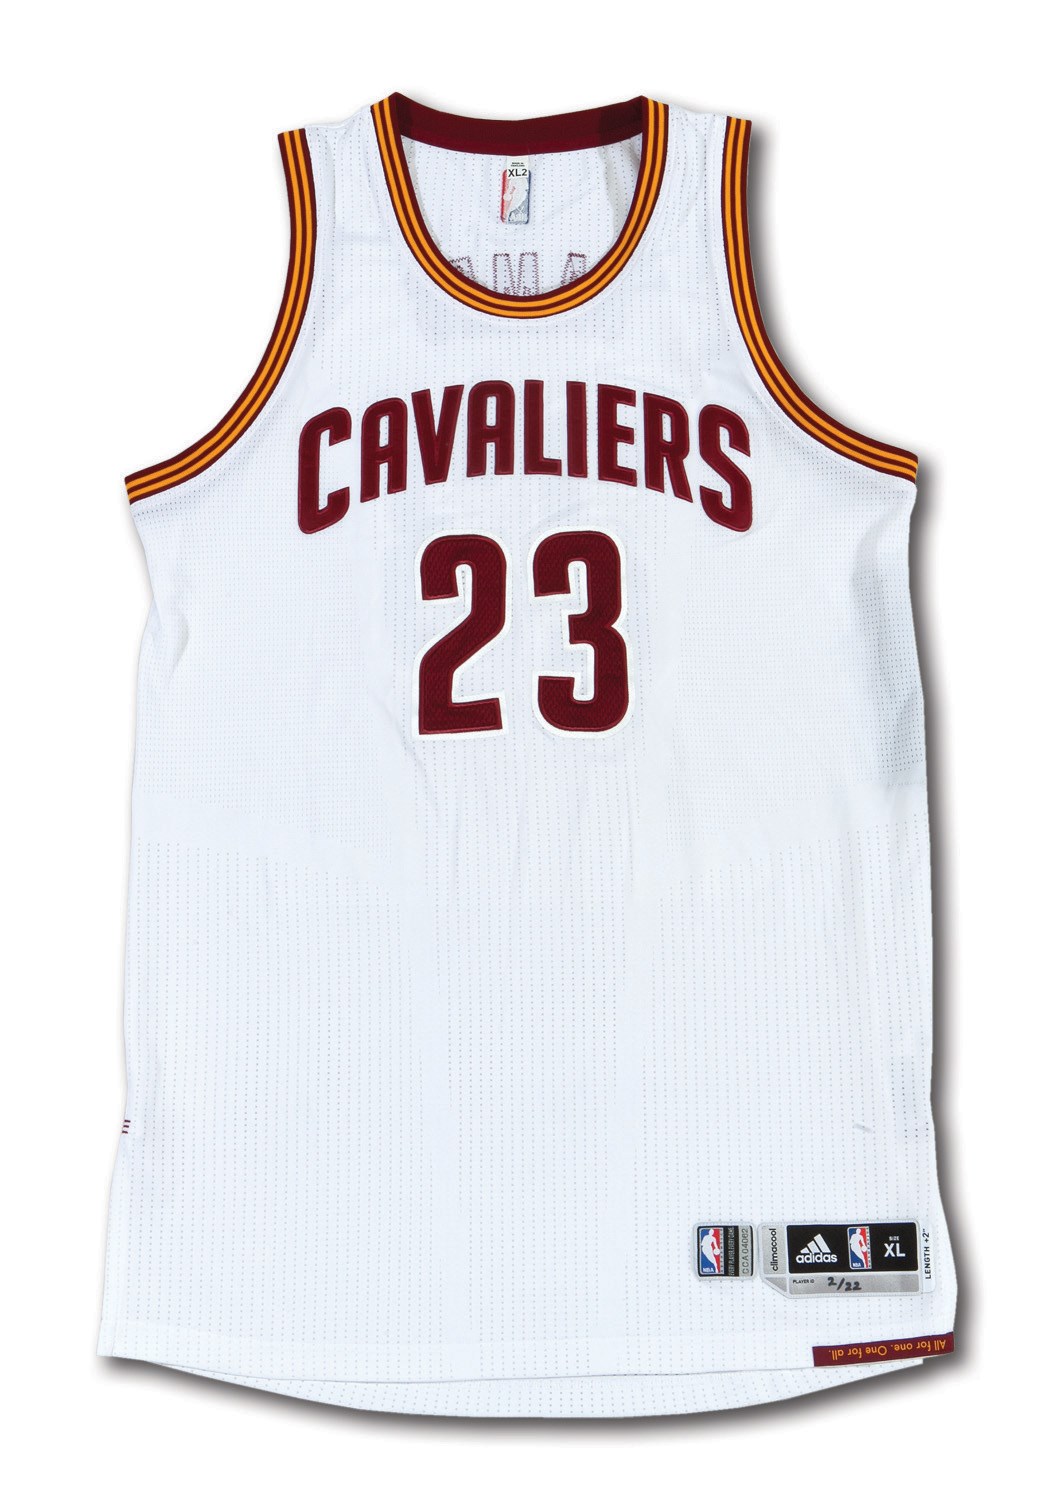 Lot Detail - 2/22/2016 LEBRON JAMES SIGNED CLEVELAND CAVALIERS  (CHAMPIONSHIP SEASON) GAME WORN HOME JERSEY - 12 PTS. & 8 REB. VS. PISTONS ( NBA SOURCE, PHOTO-MATCHED)